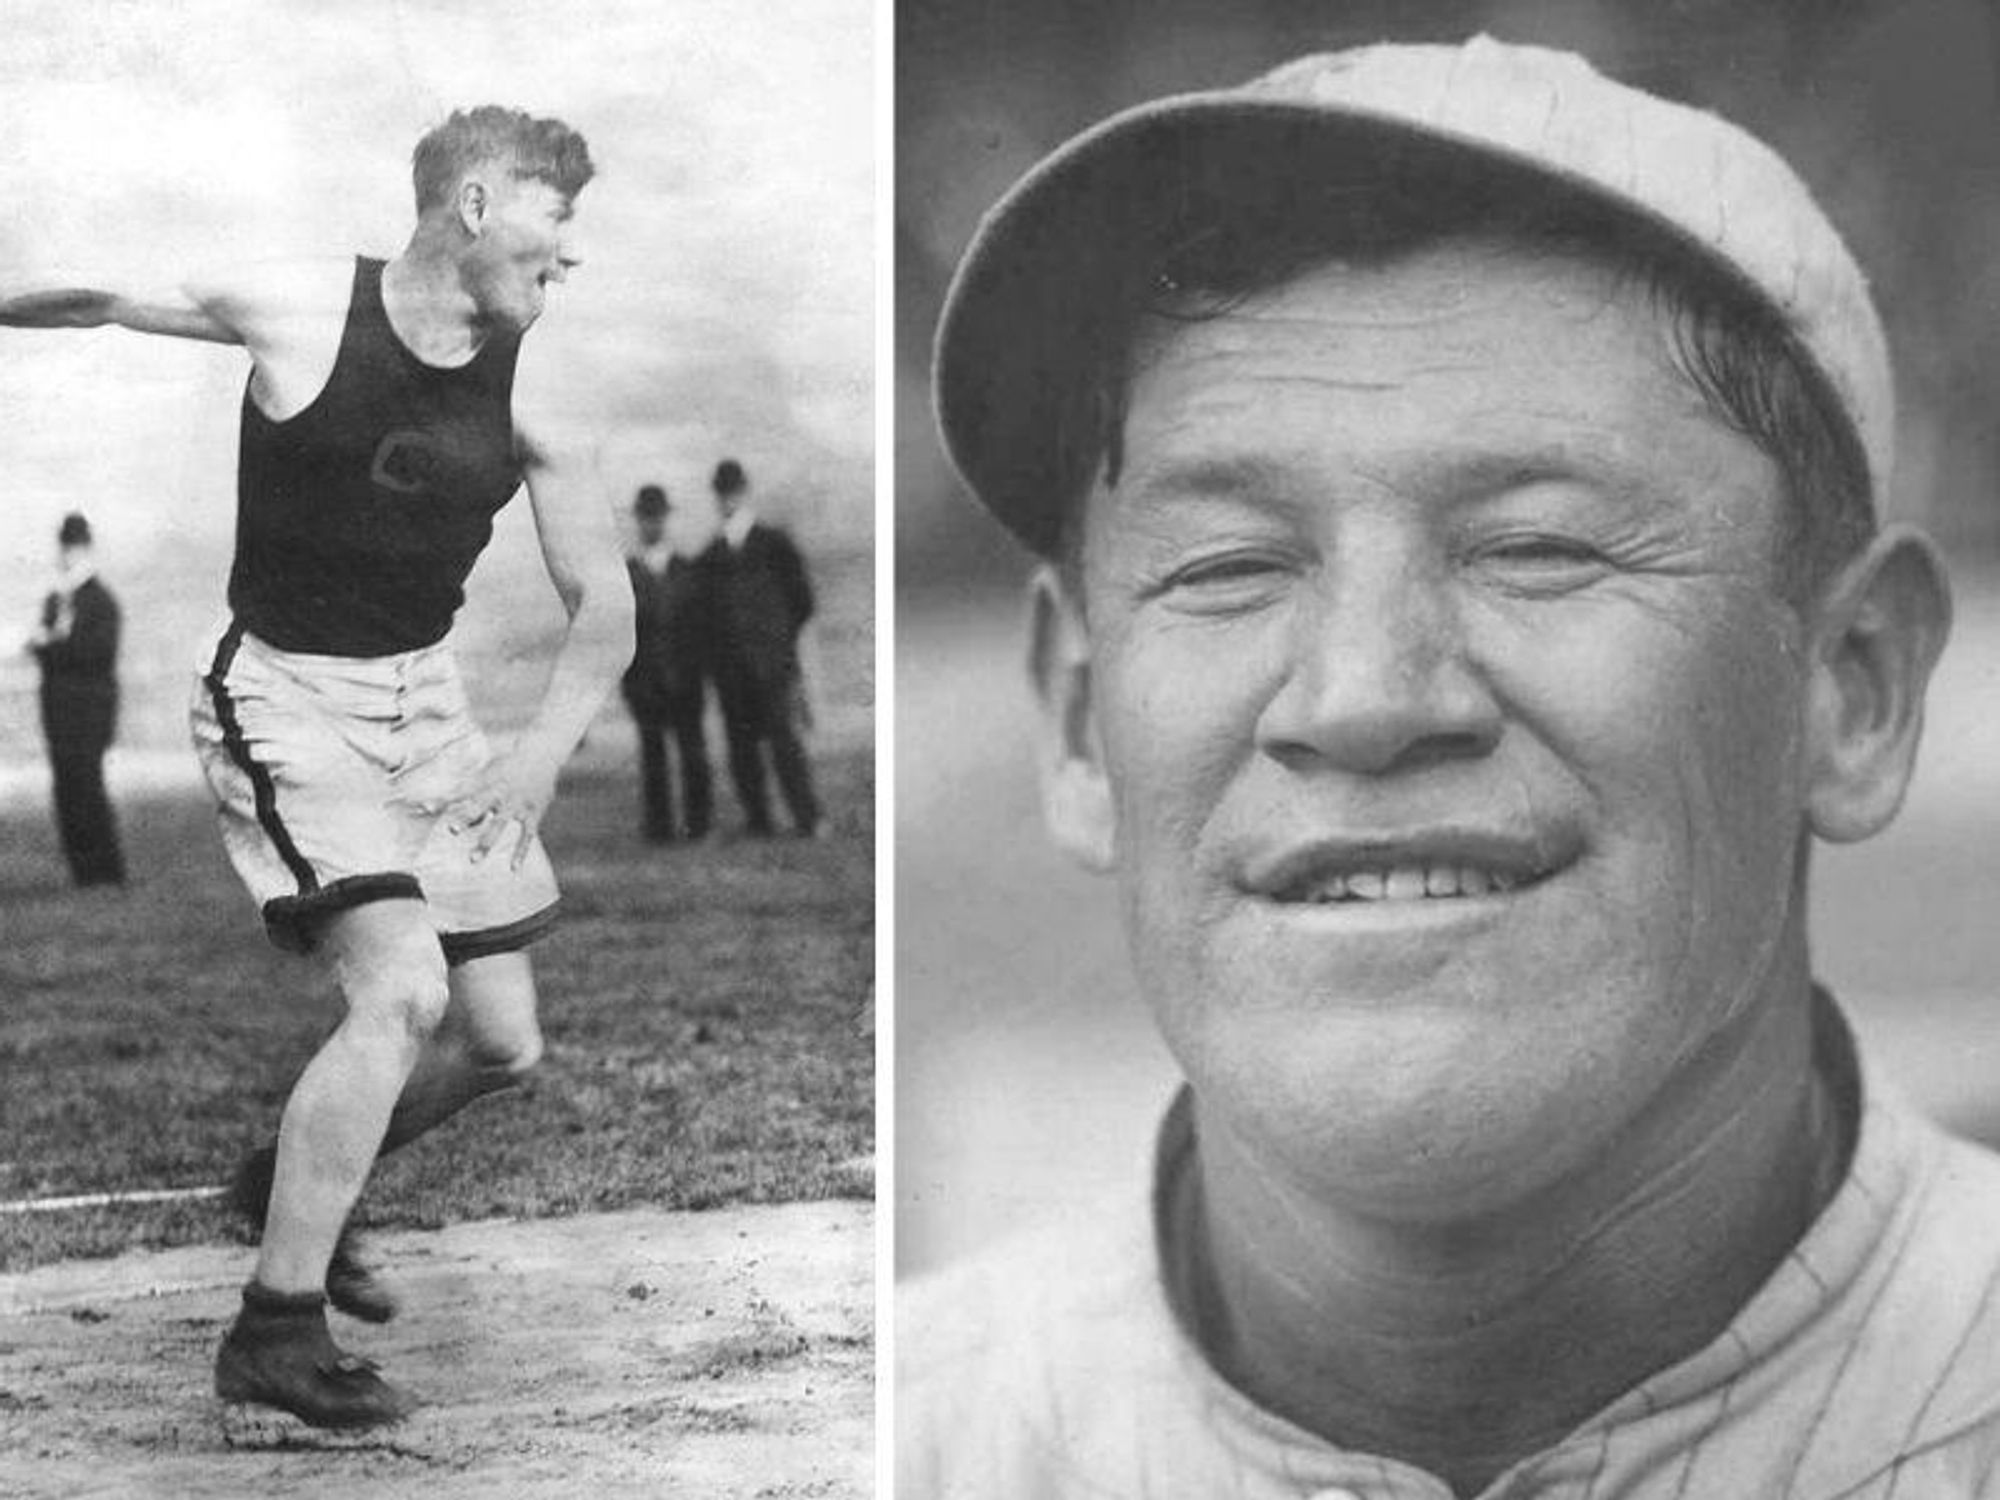 Jim Thorpe's gold medals officially reinstated after 110 years